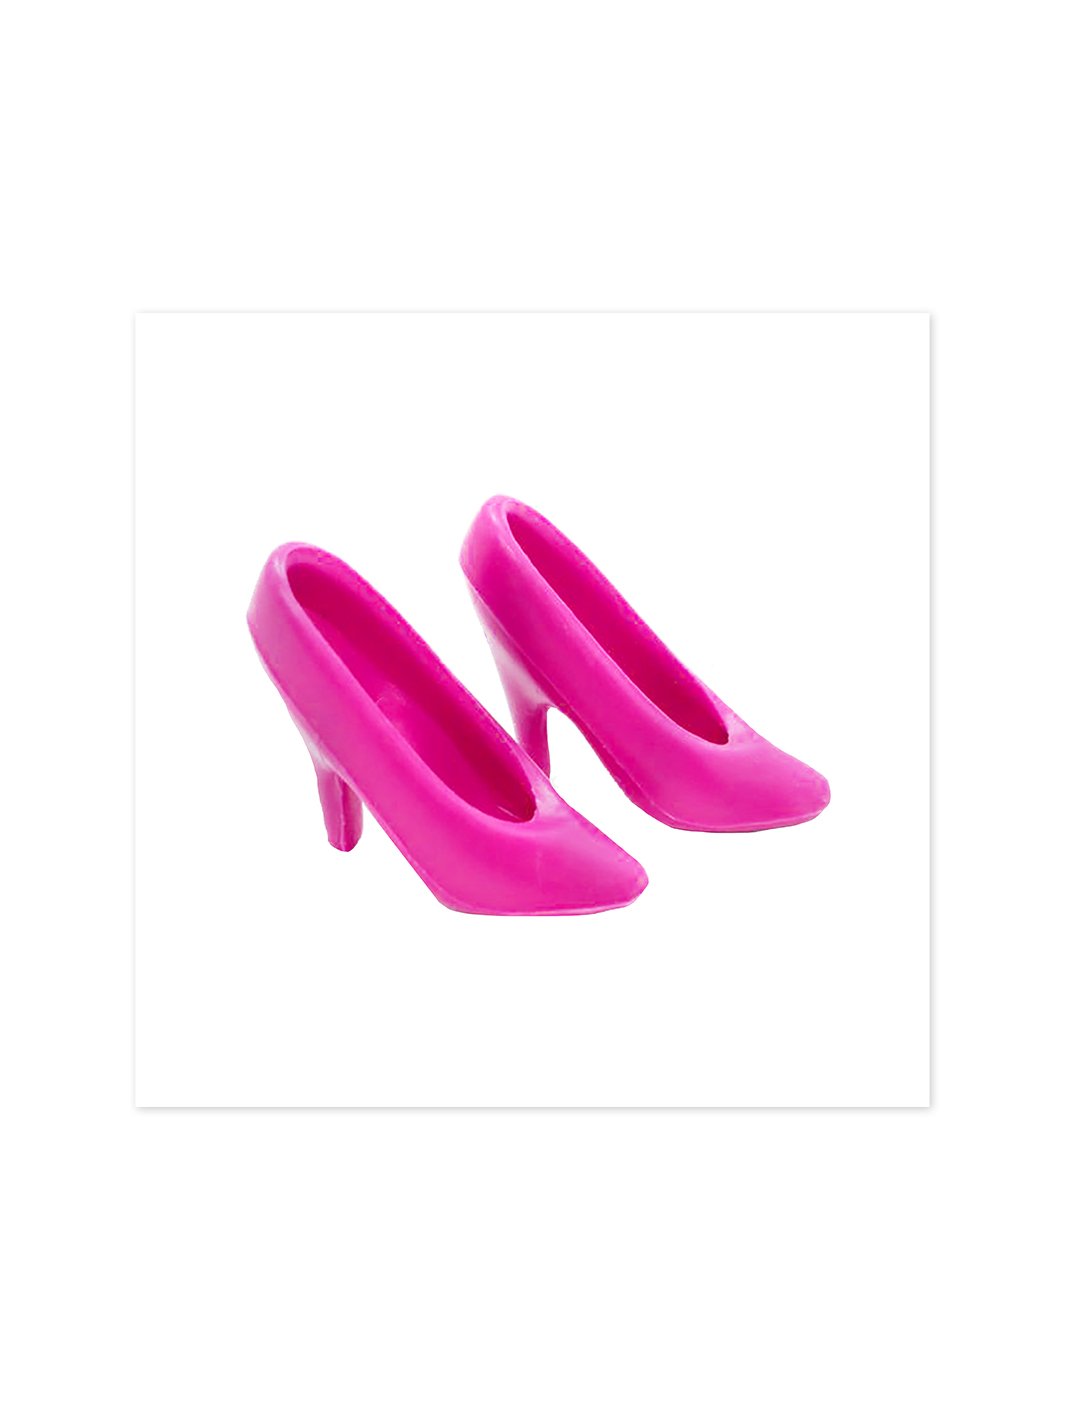 'Barbie™ Pink Pumps on Acrylic